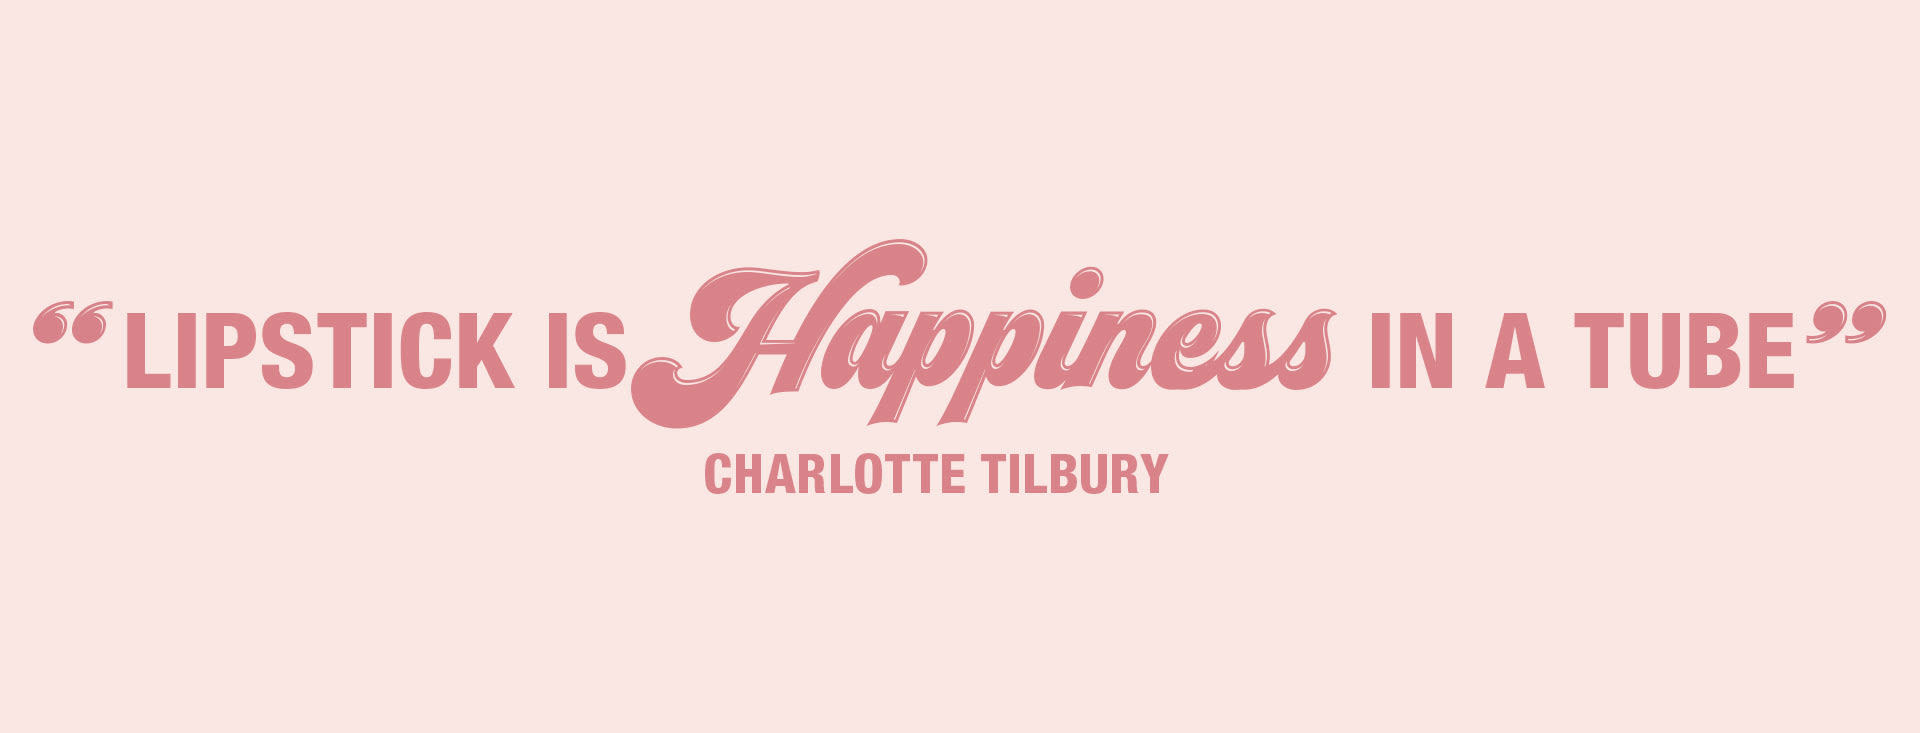 'Lipstick is Happiness in a tube' positive affirmation